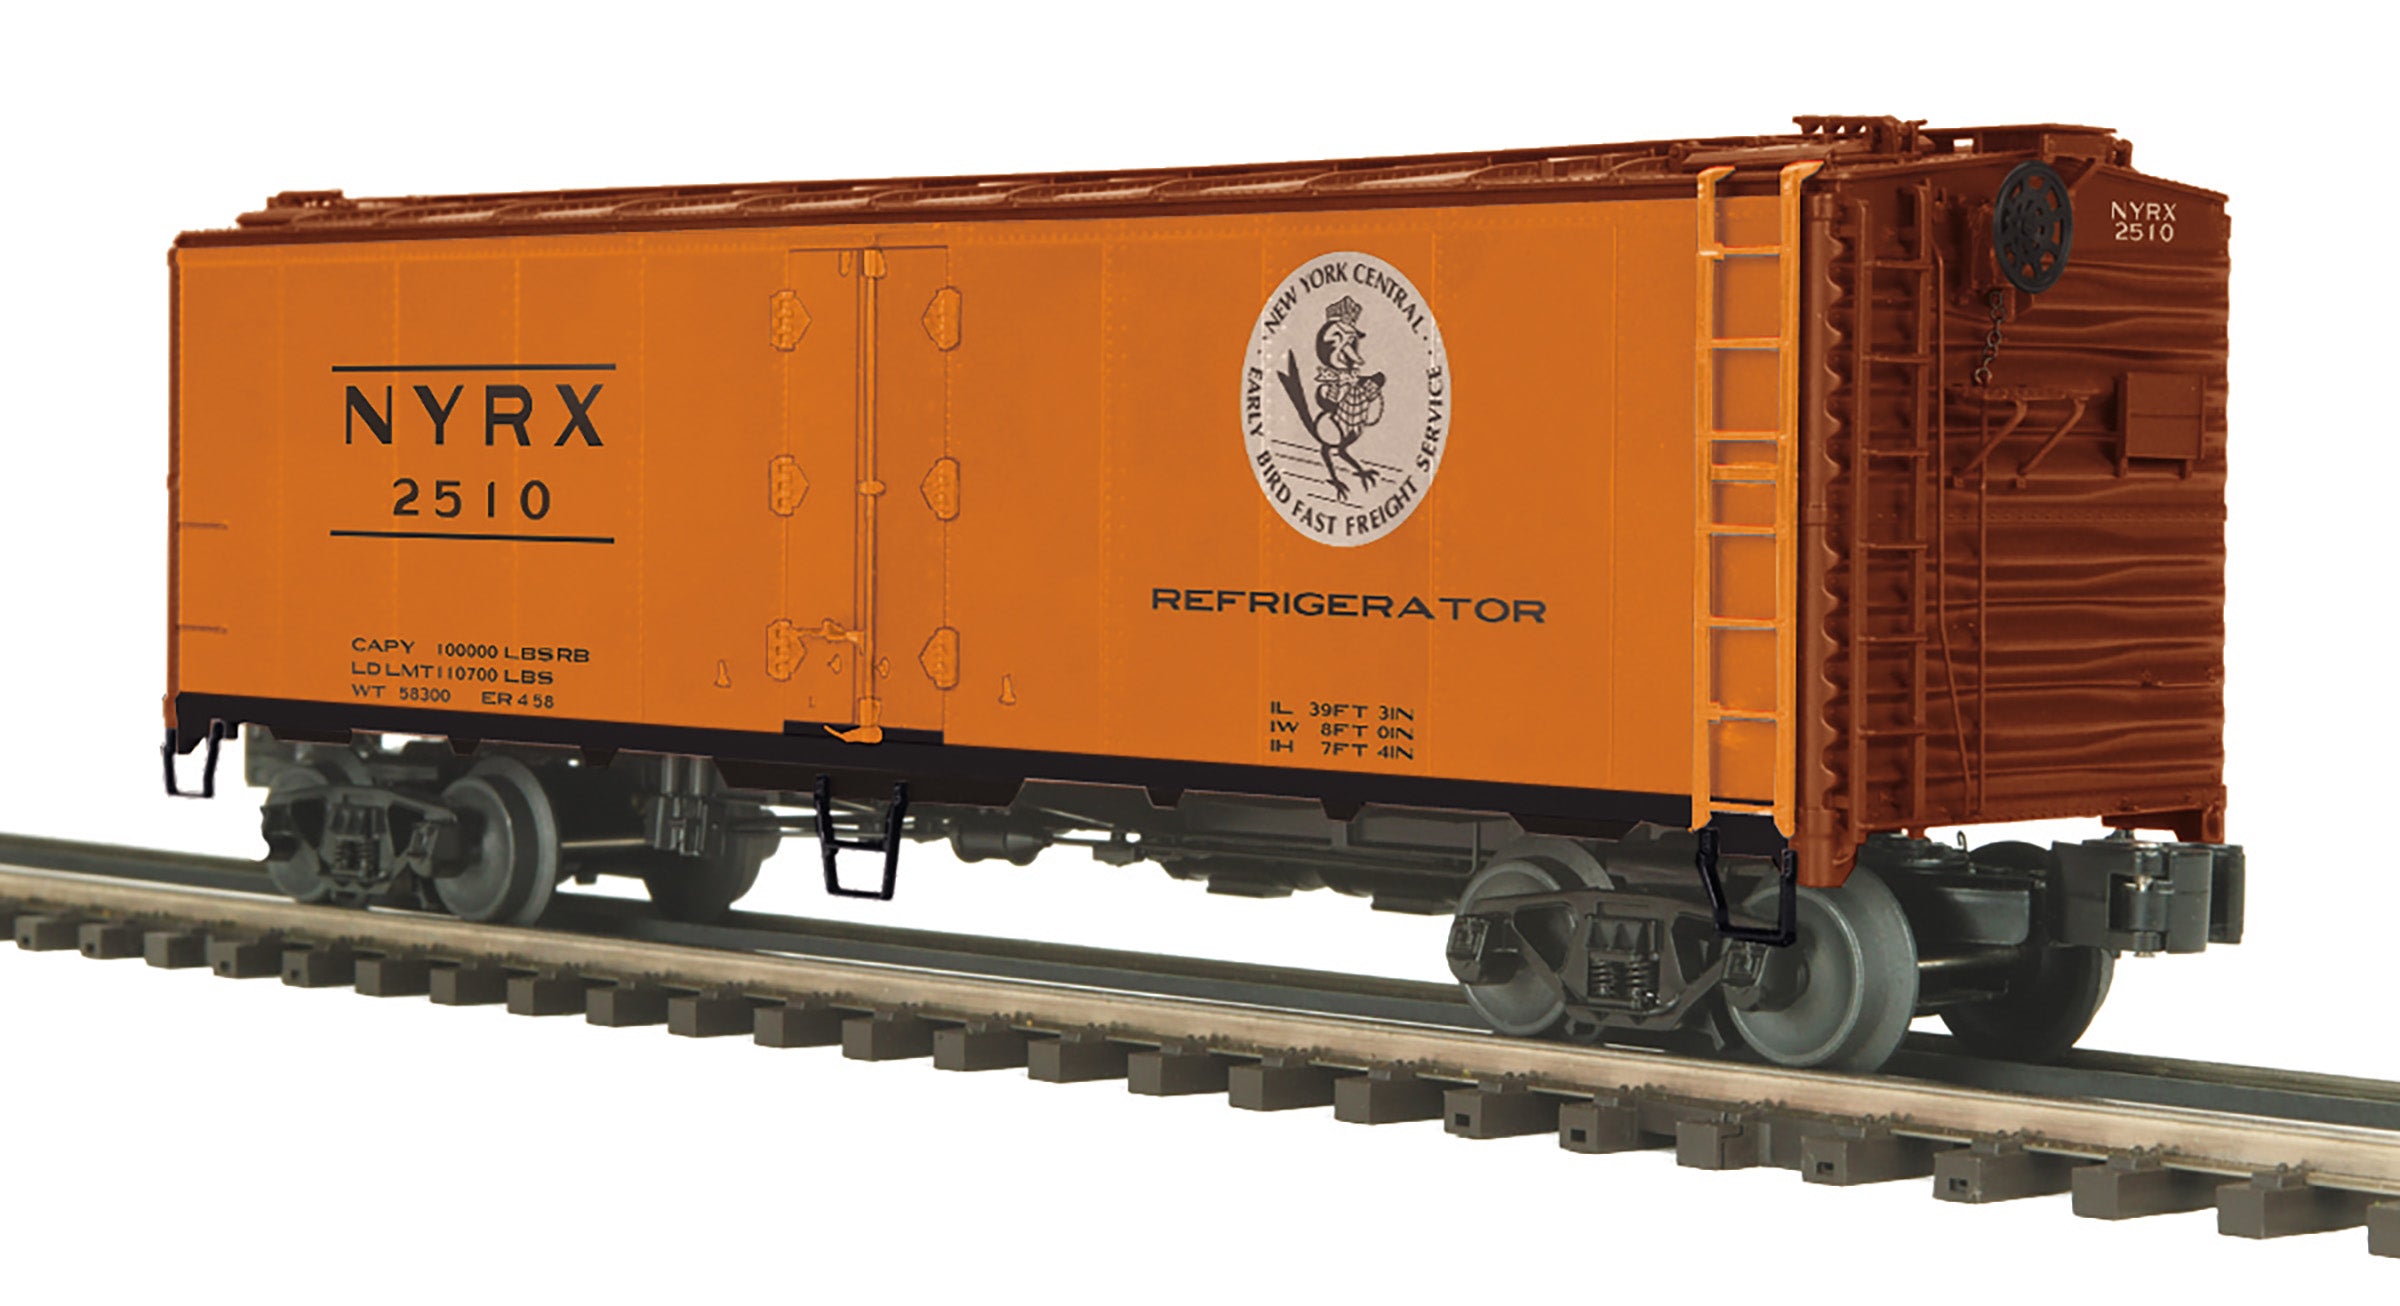 MTH 20-94594 - 40' Steel Sided Reefer Car "New York Central" #2510 - Custom Run for MrMuffin'sTrains